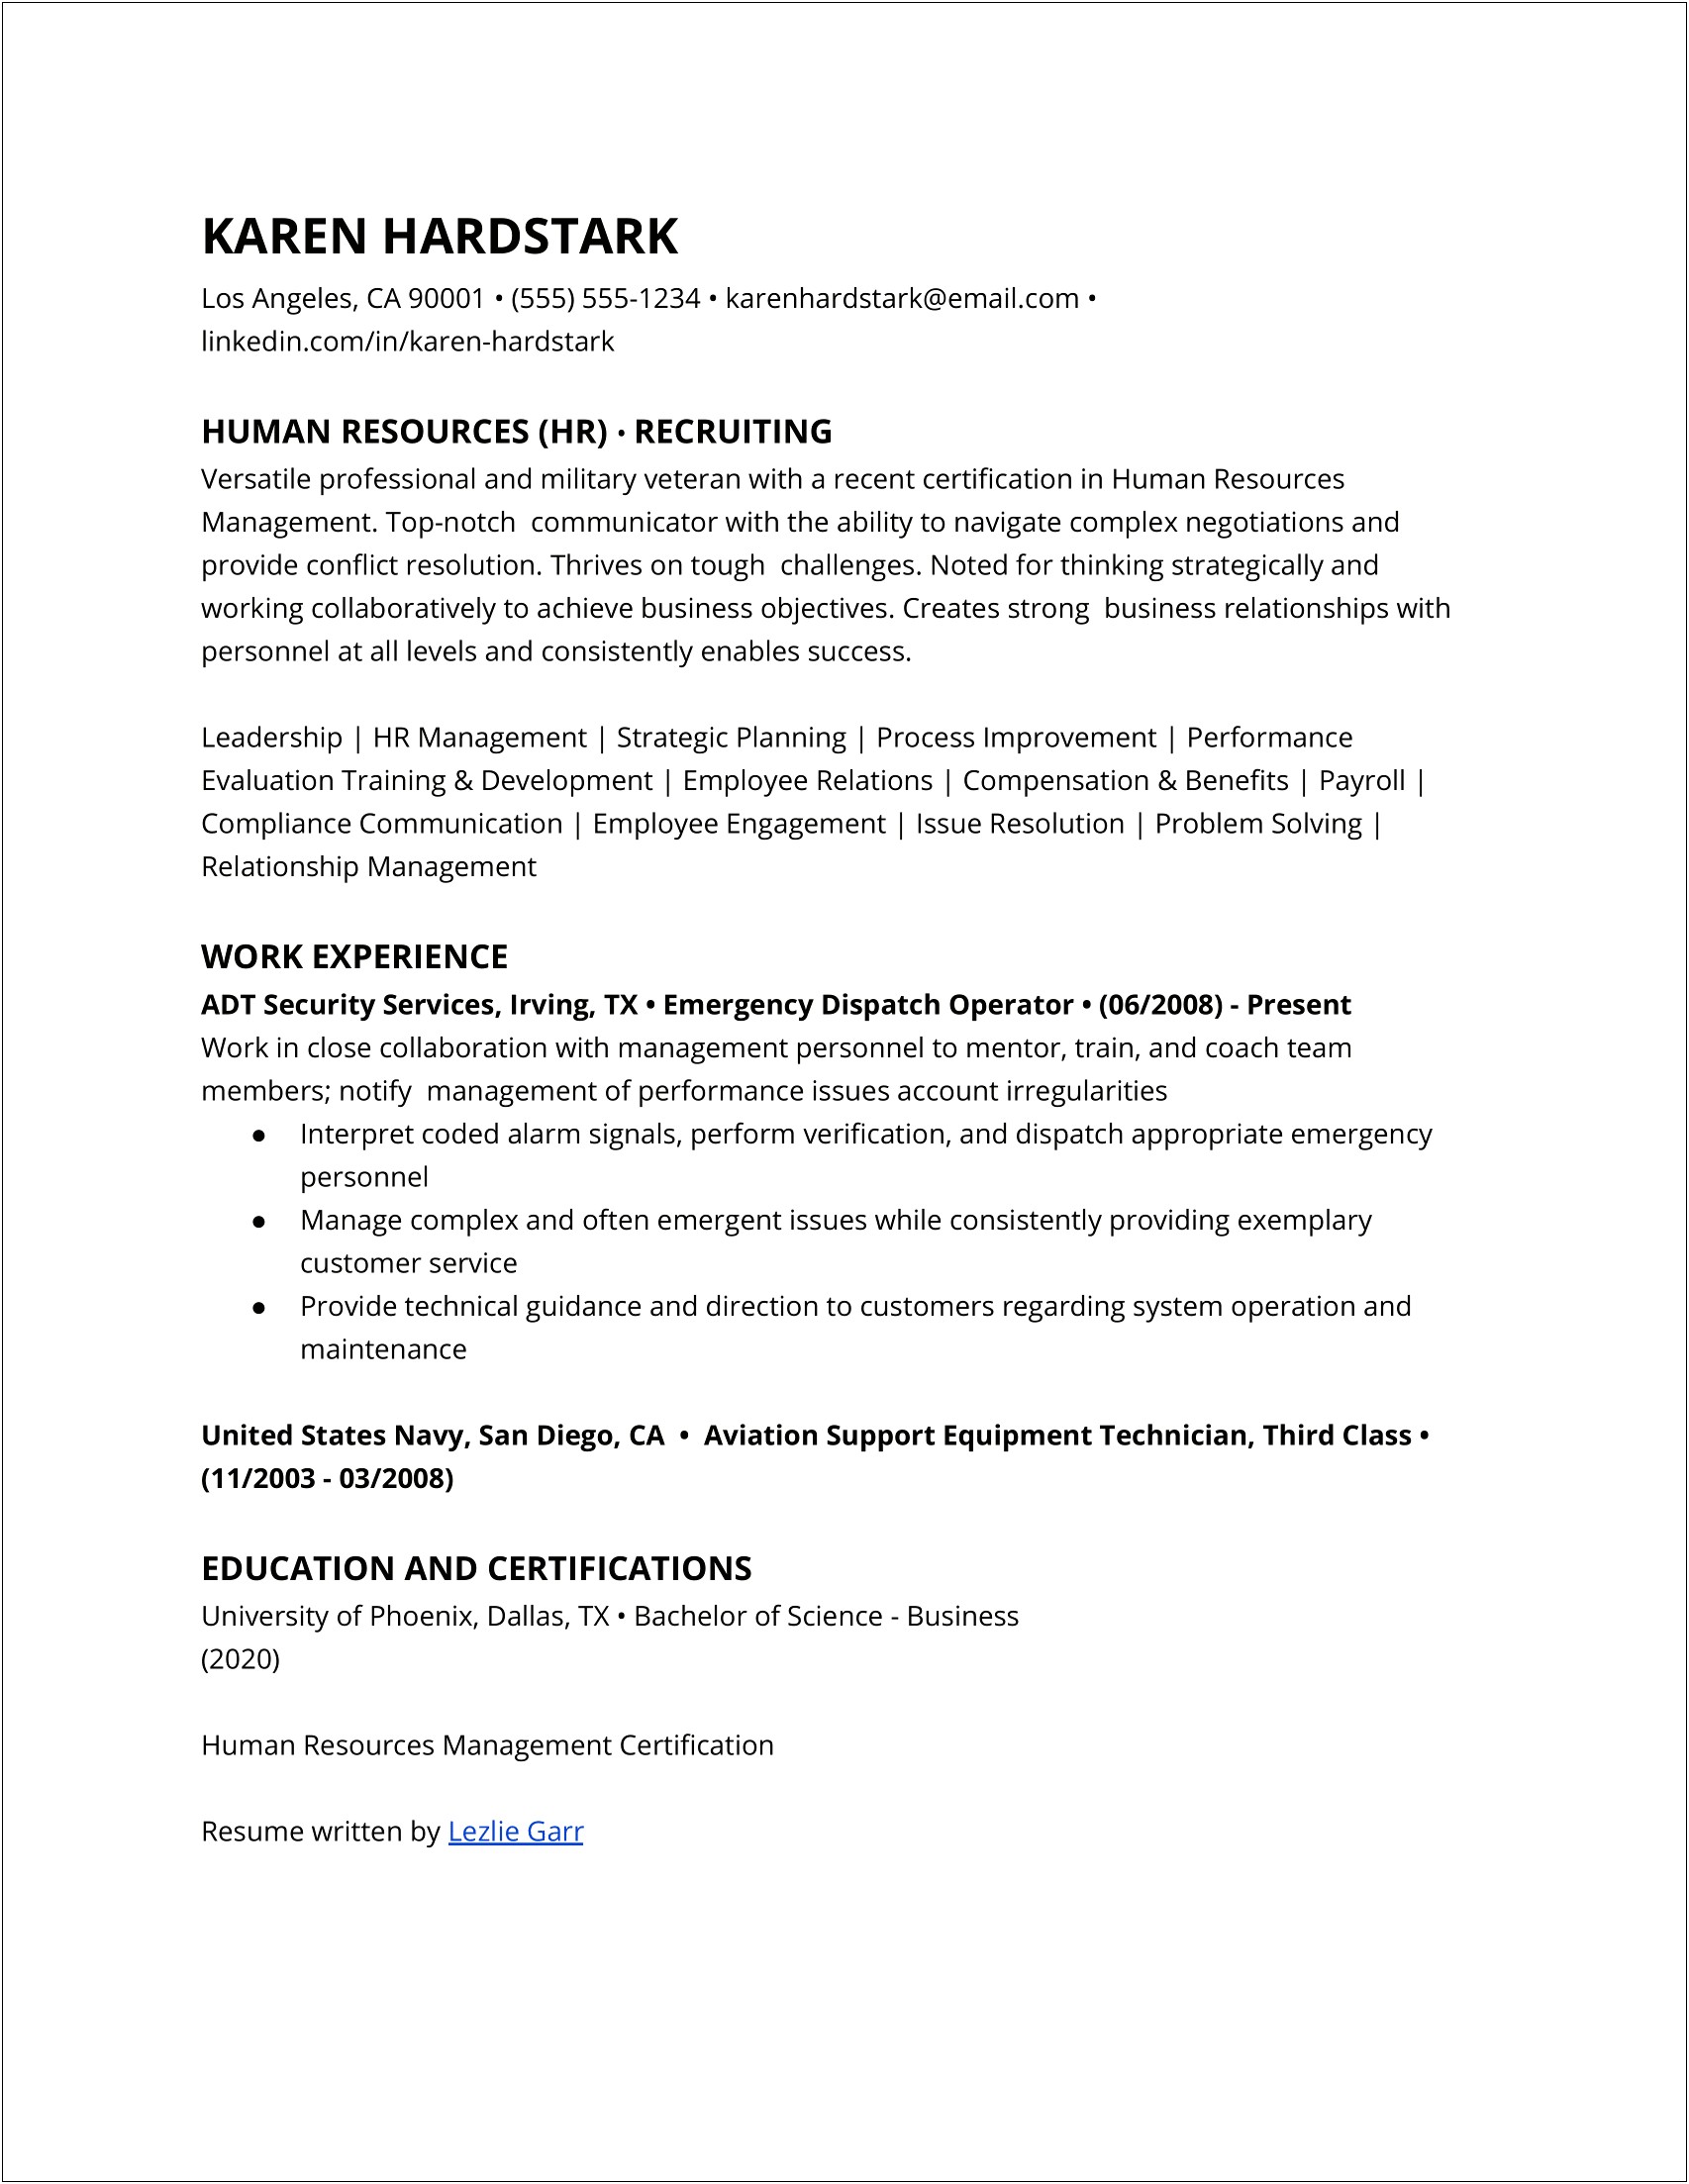 Human Resources Resume Sample Objective